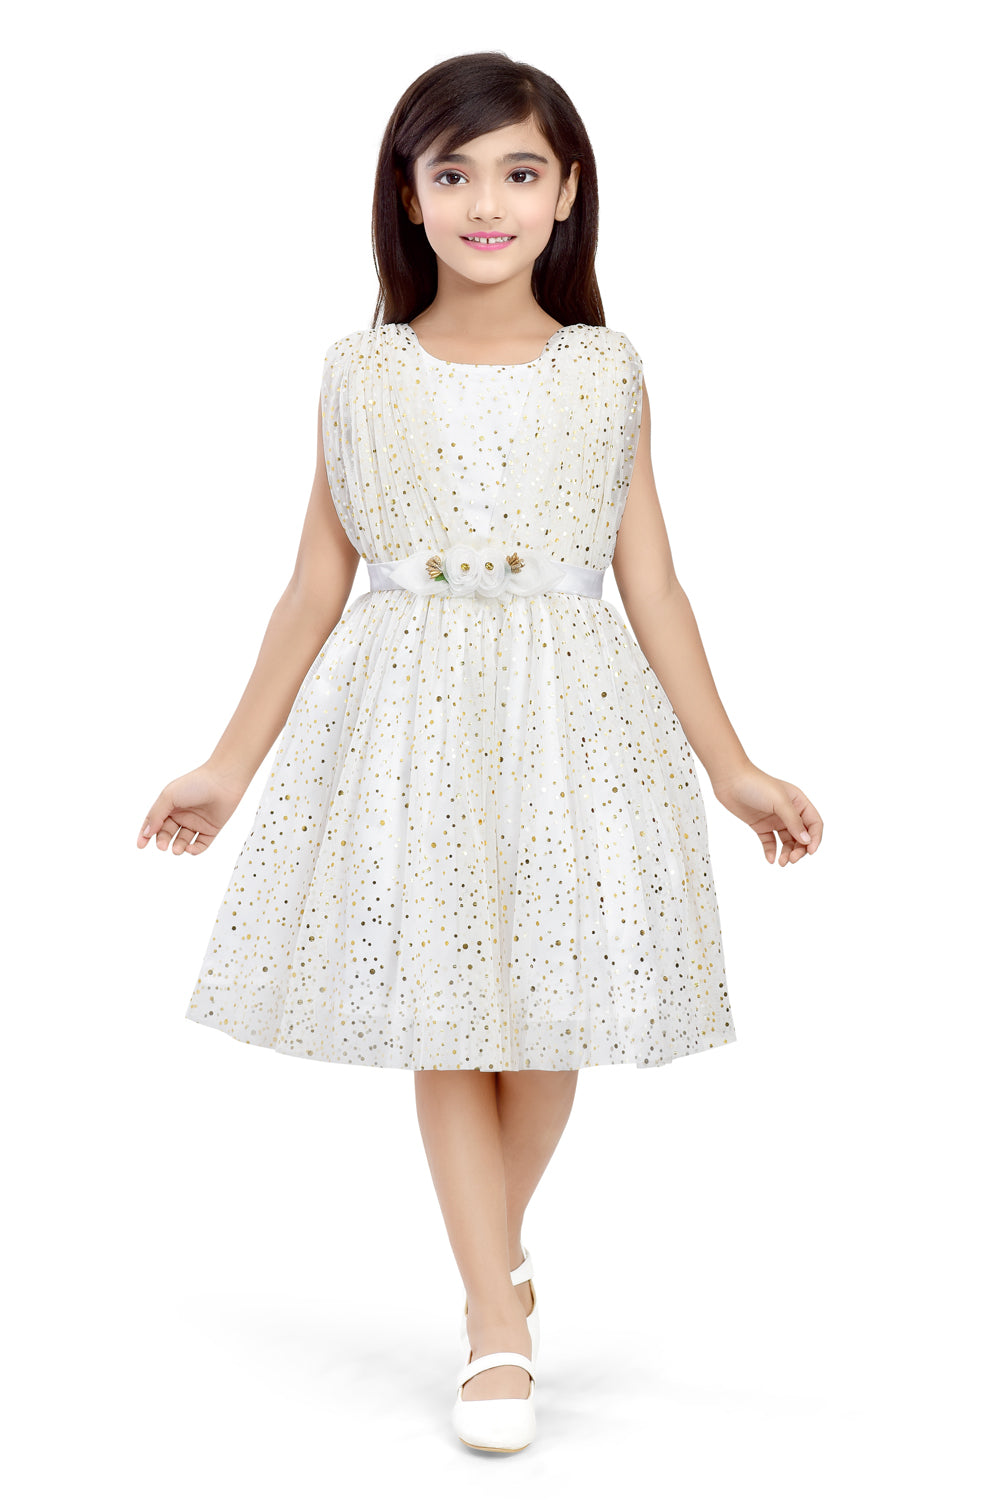 Doodle Girls Offwhite Foil Gold Polka dots With Sleeveless Dress